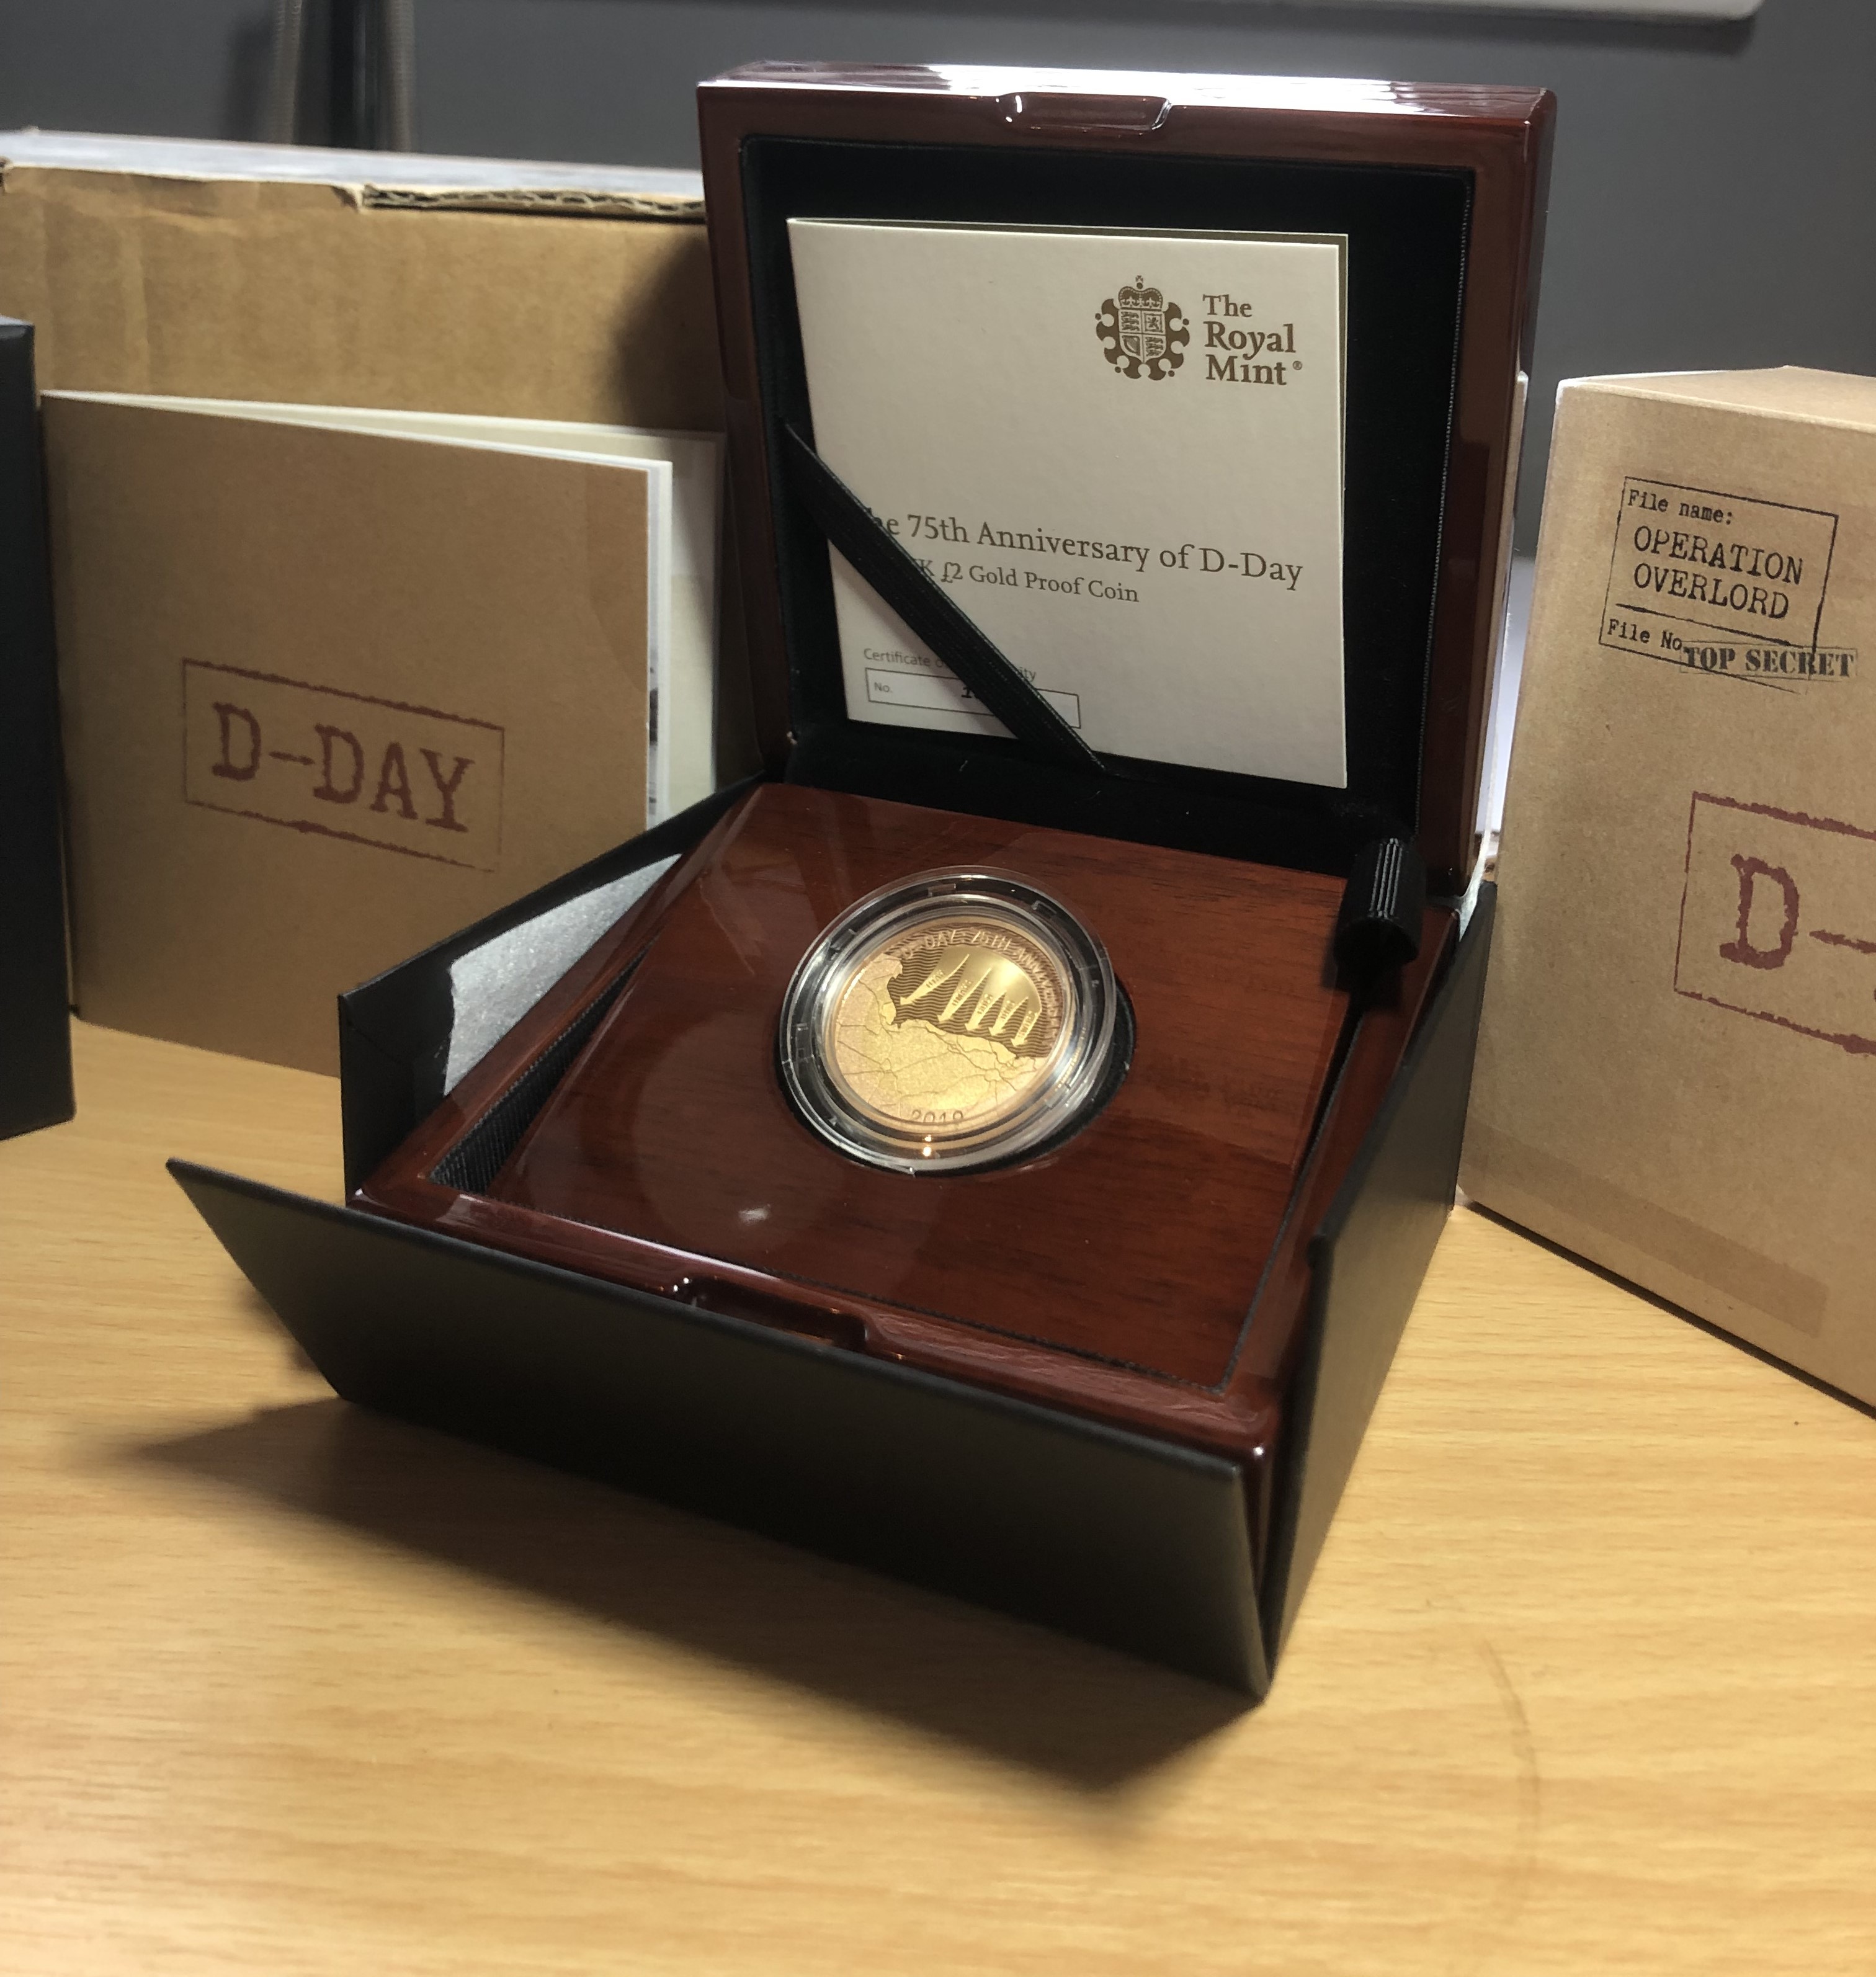 2019 dday gold two pound